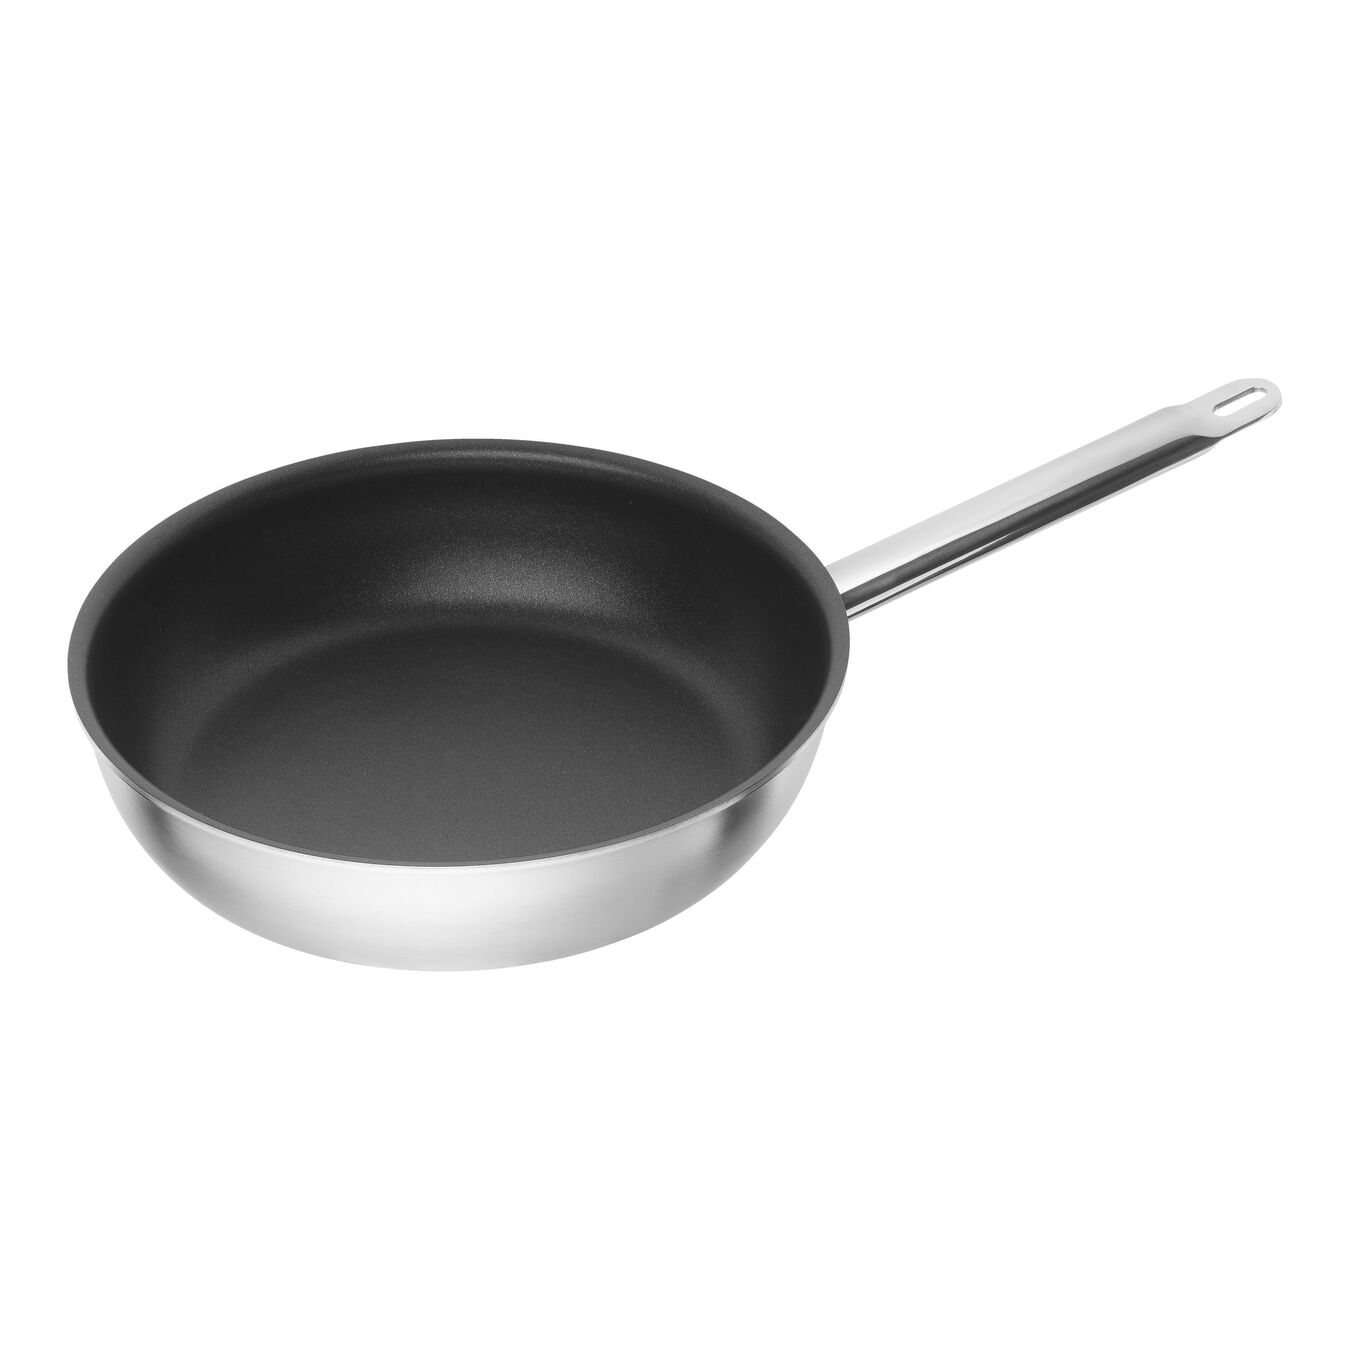 28 cm / 11 inch 18/10 Stainless Steel Frying pan,,large 1